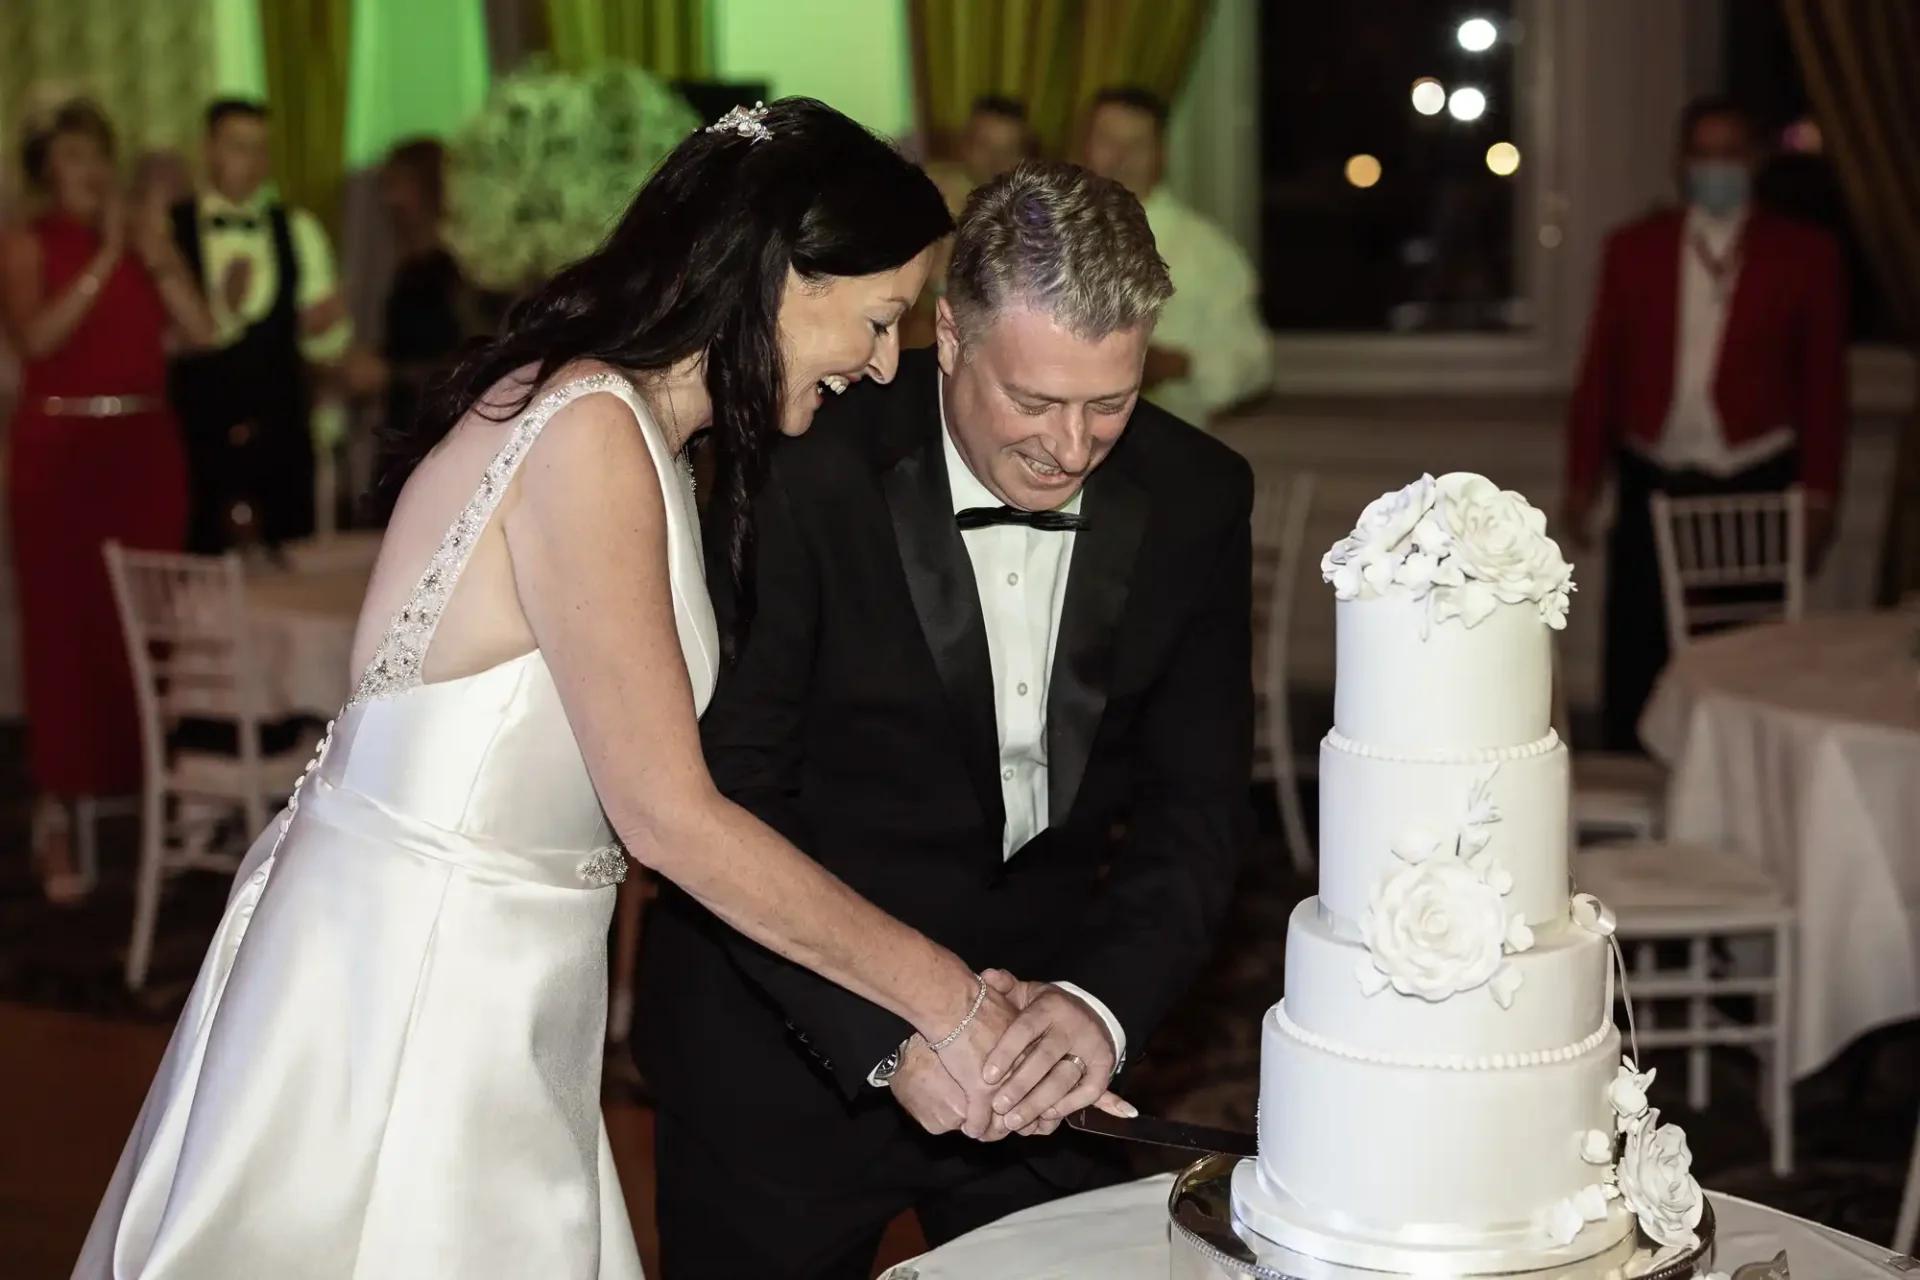 A bride and groom smiling as they cut a multi-tiered white wedding cake together at their reception.